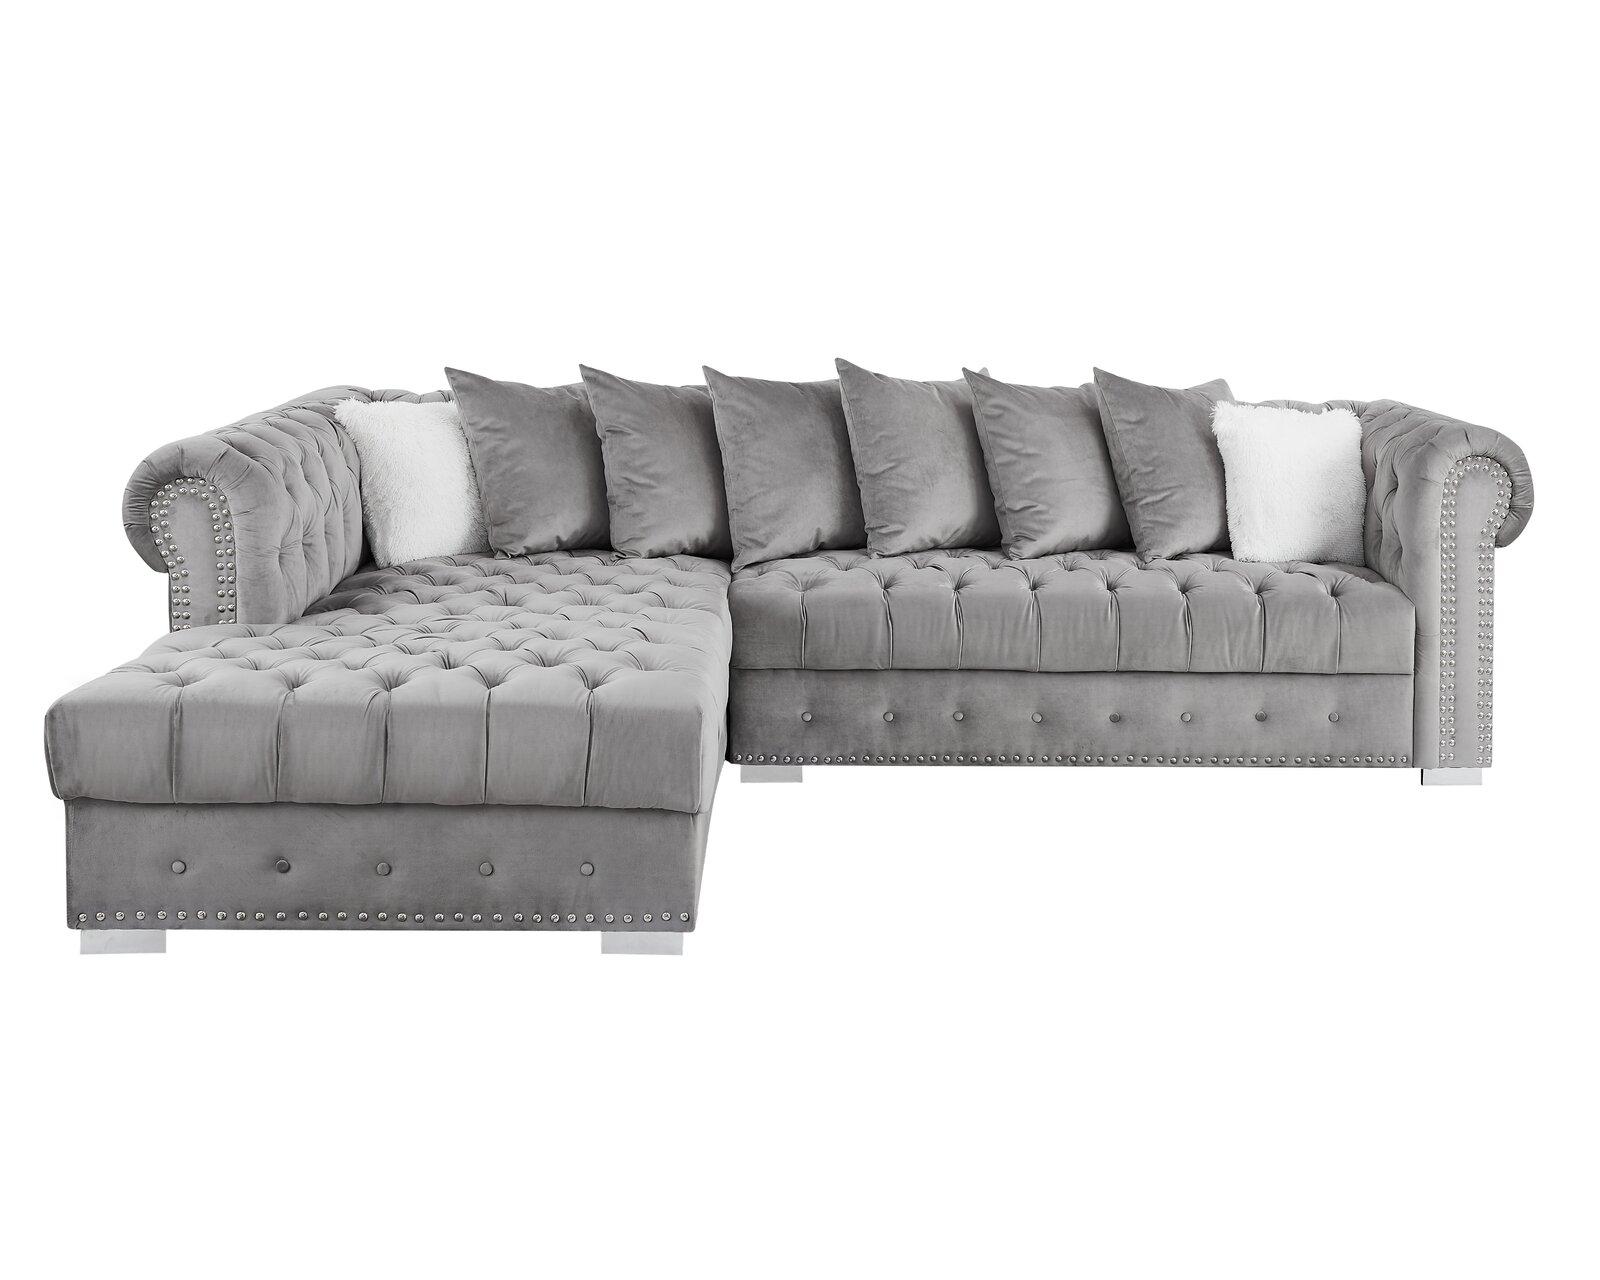 Contemporary, Modern Sectional Sofa MONICA GHF-808857713810 in Gray Fabric